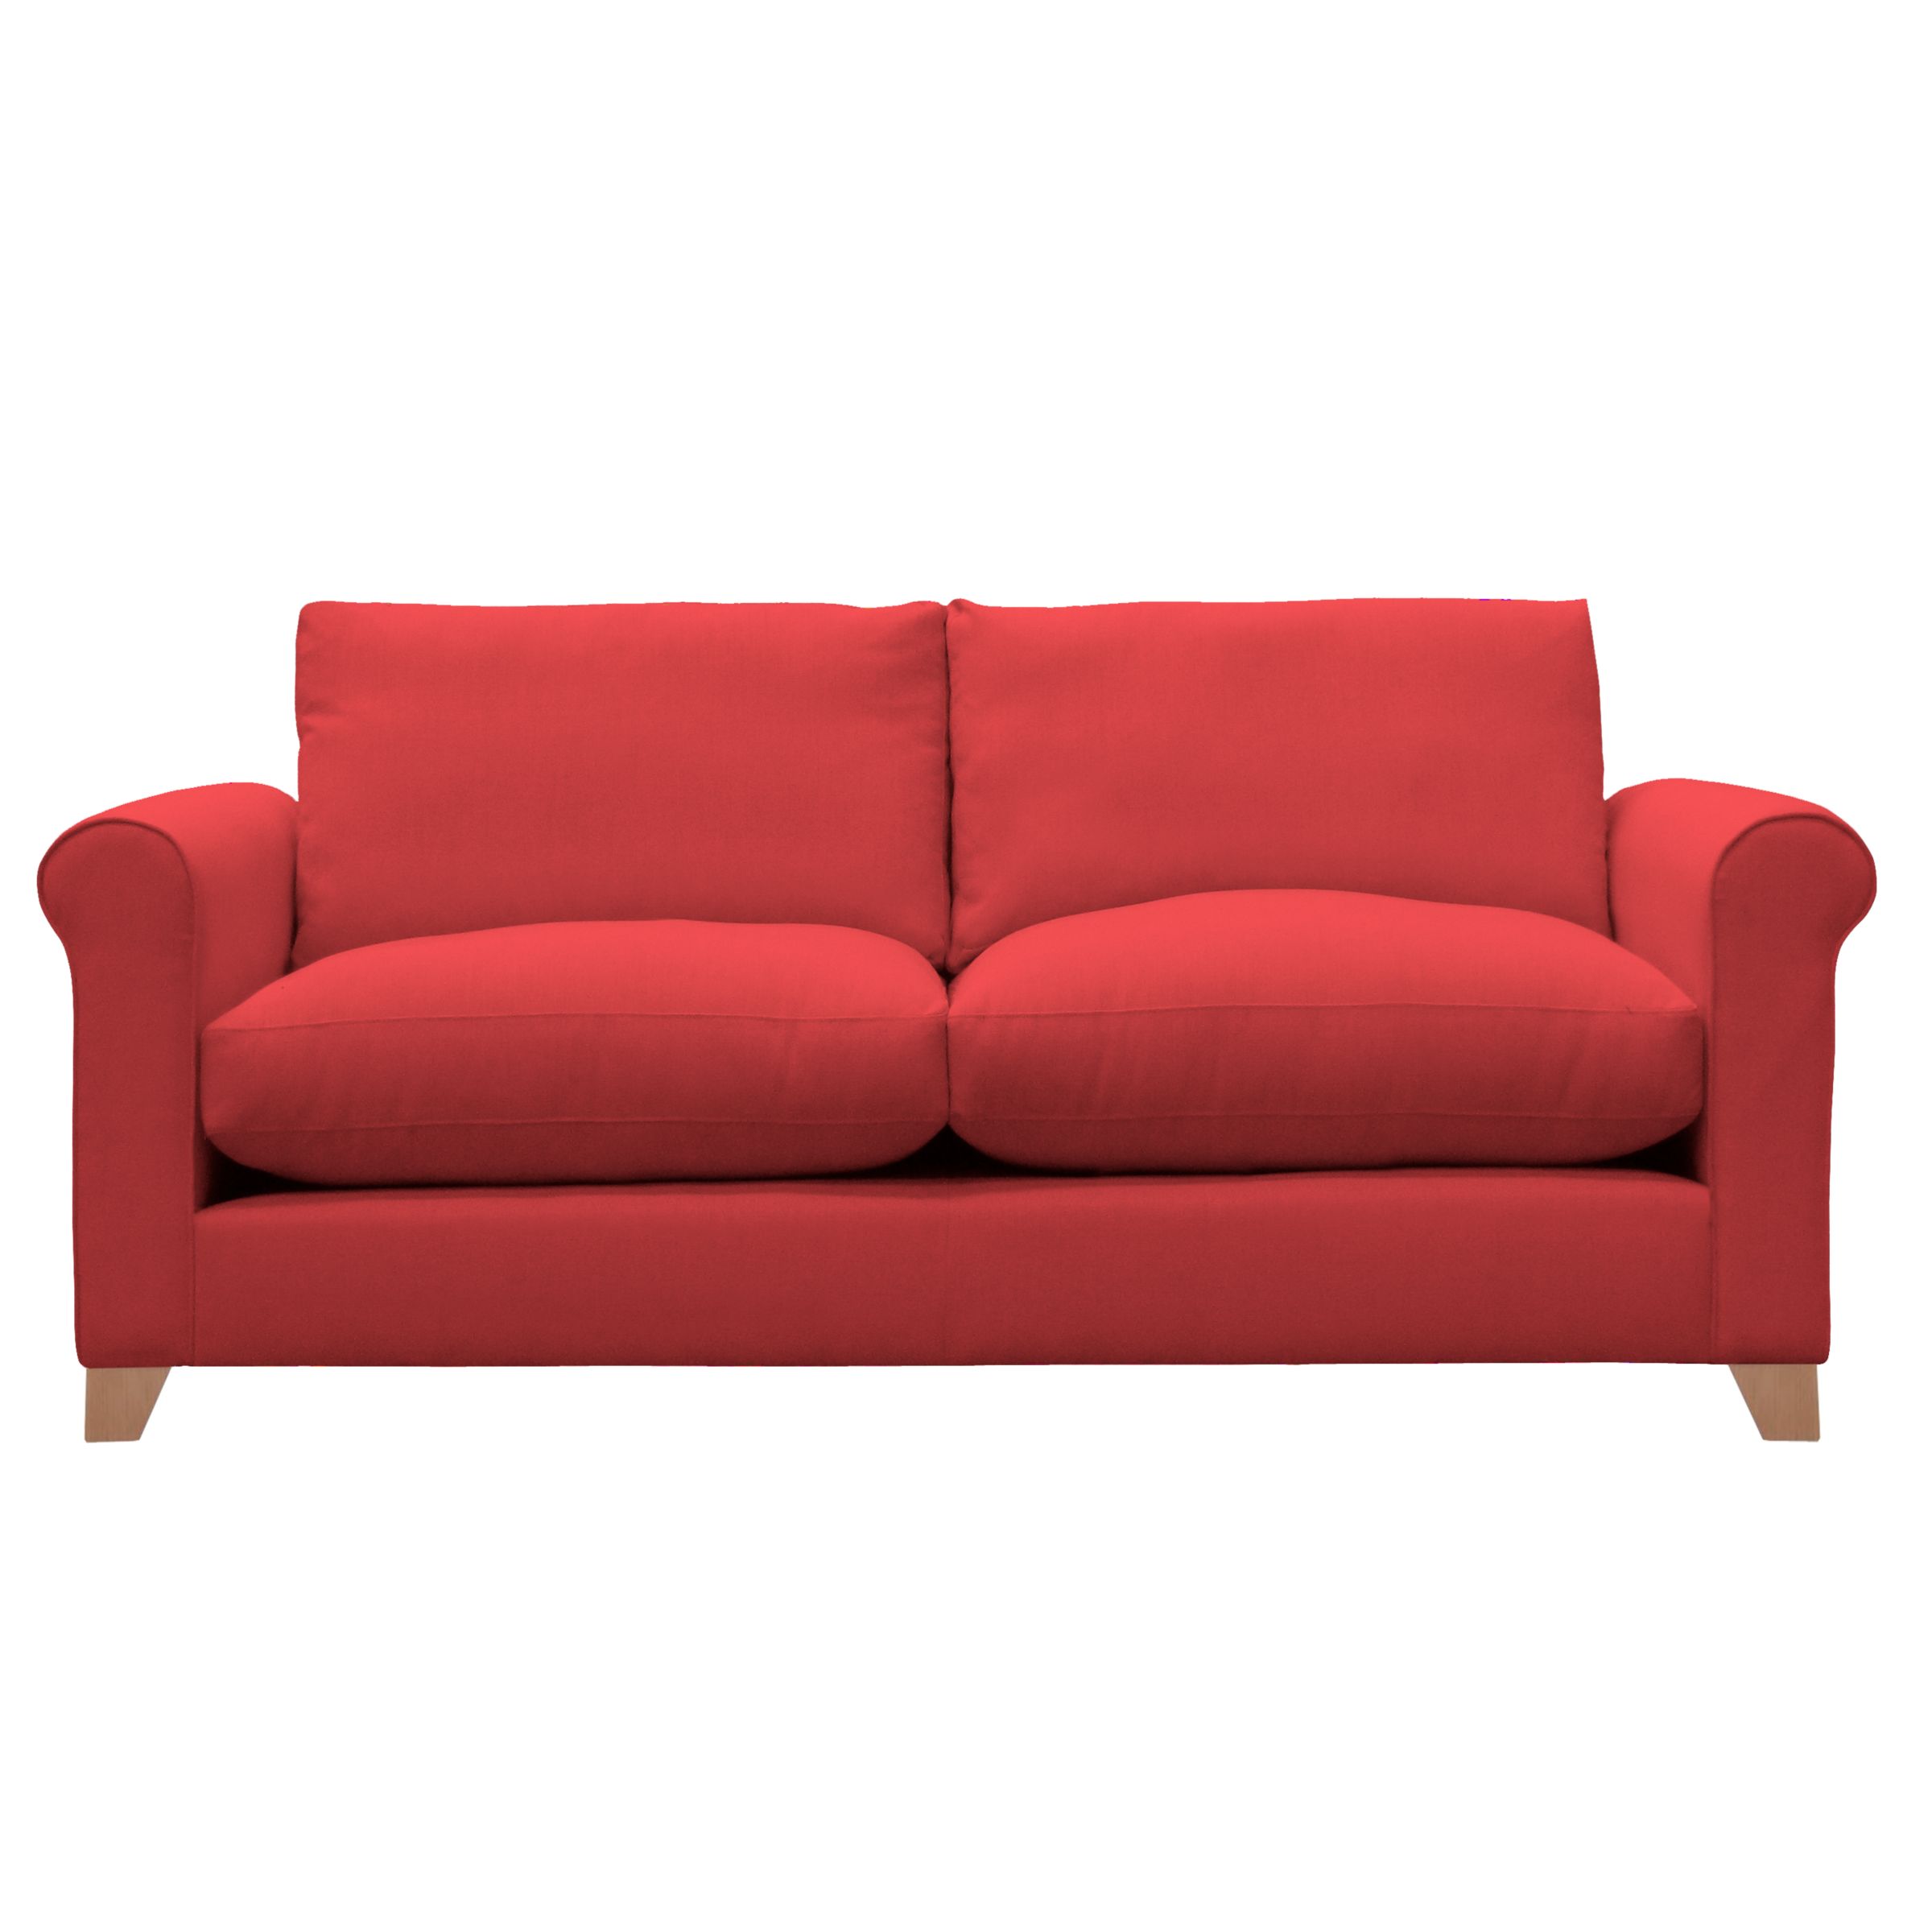 John Lewis Options Scroll Arm Large Sofa, Linley Red, width 192cm